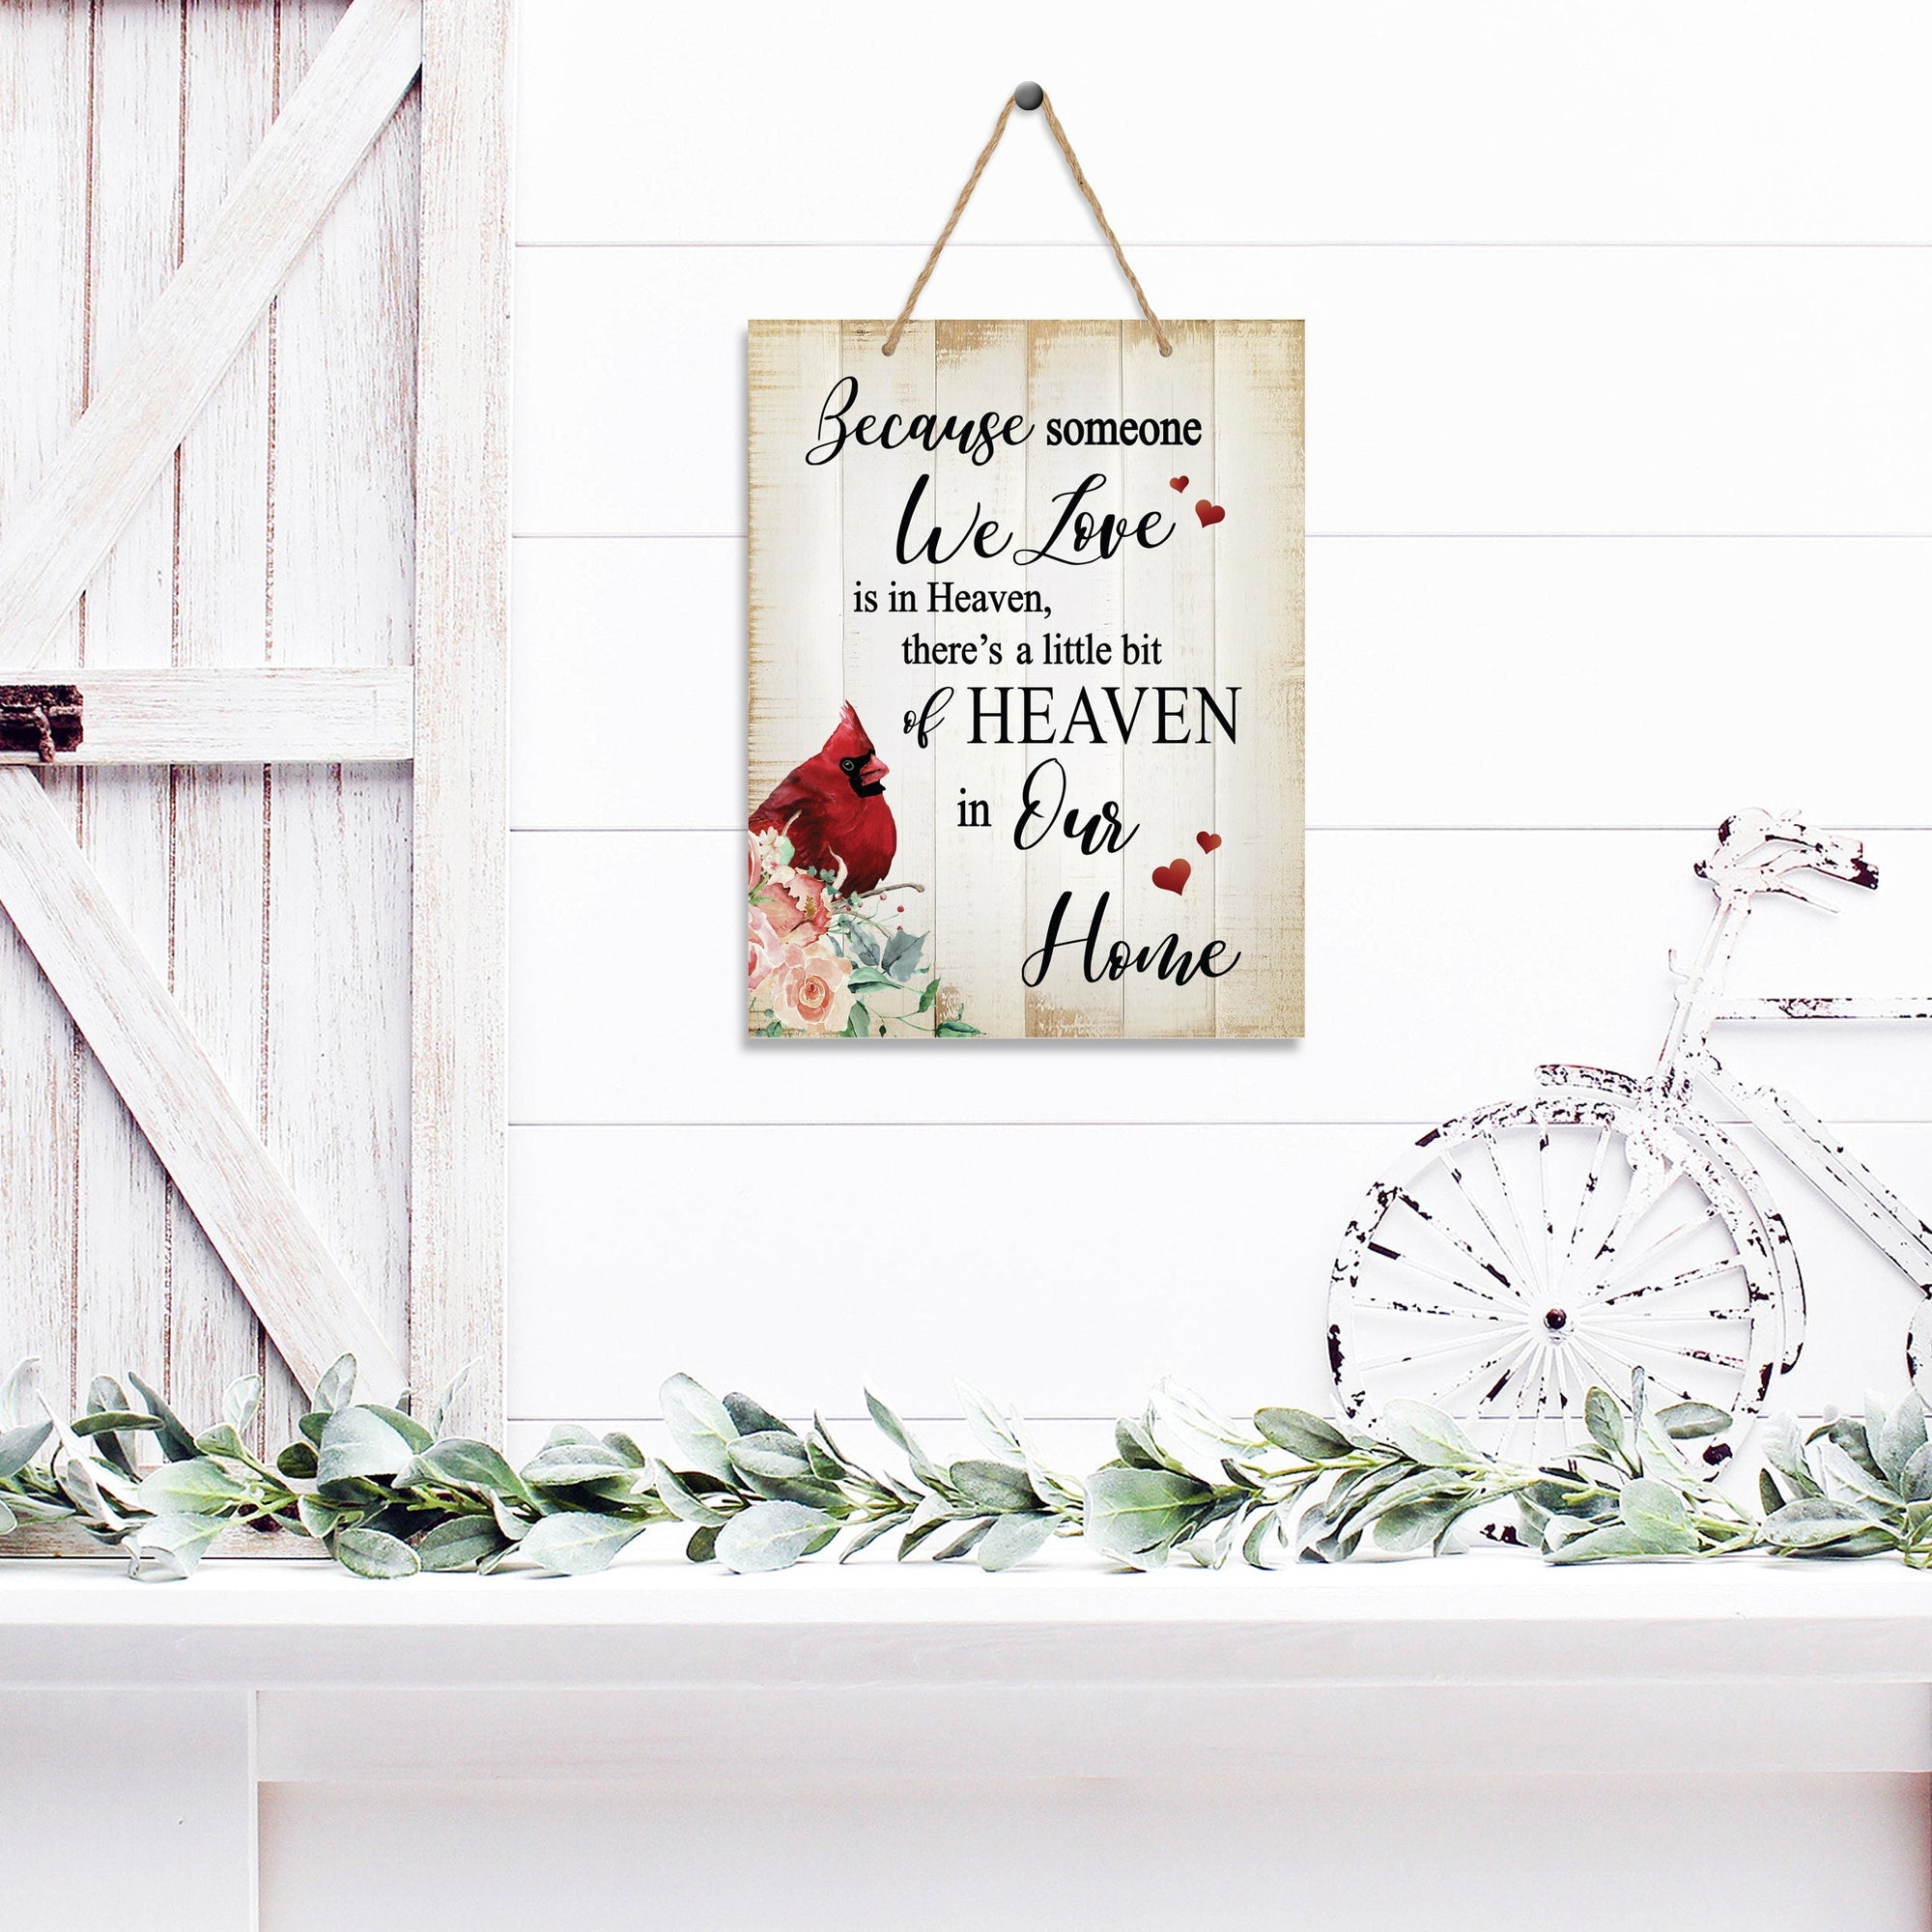 Handcrafted wooden memorial ribbon sign with a touching message, a meaningful way to remember loved ones and honor their memory.